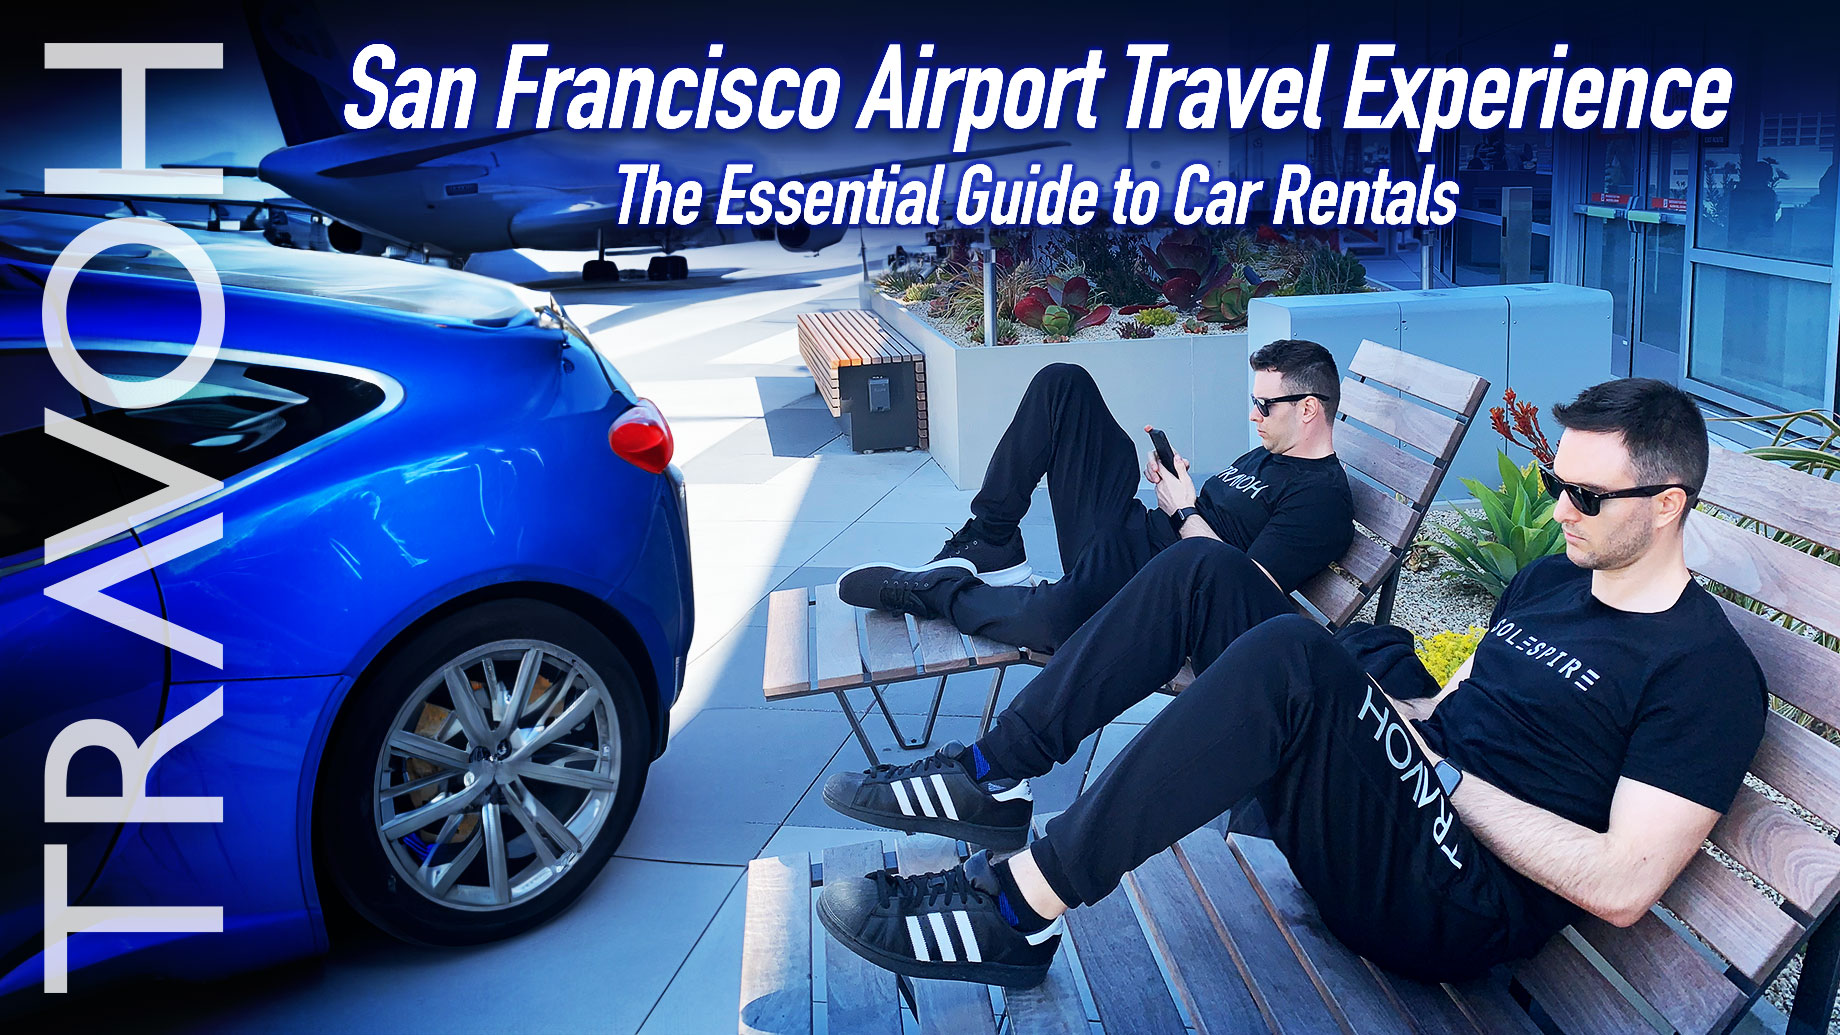 San Francisco Airport Travel Experience: The Essential Guide to Car Rentals - Featuring Marcus Anthony & Derek Alexander